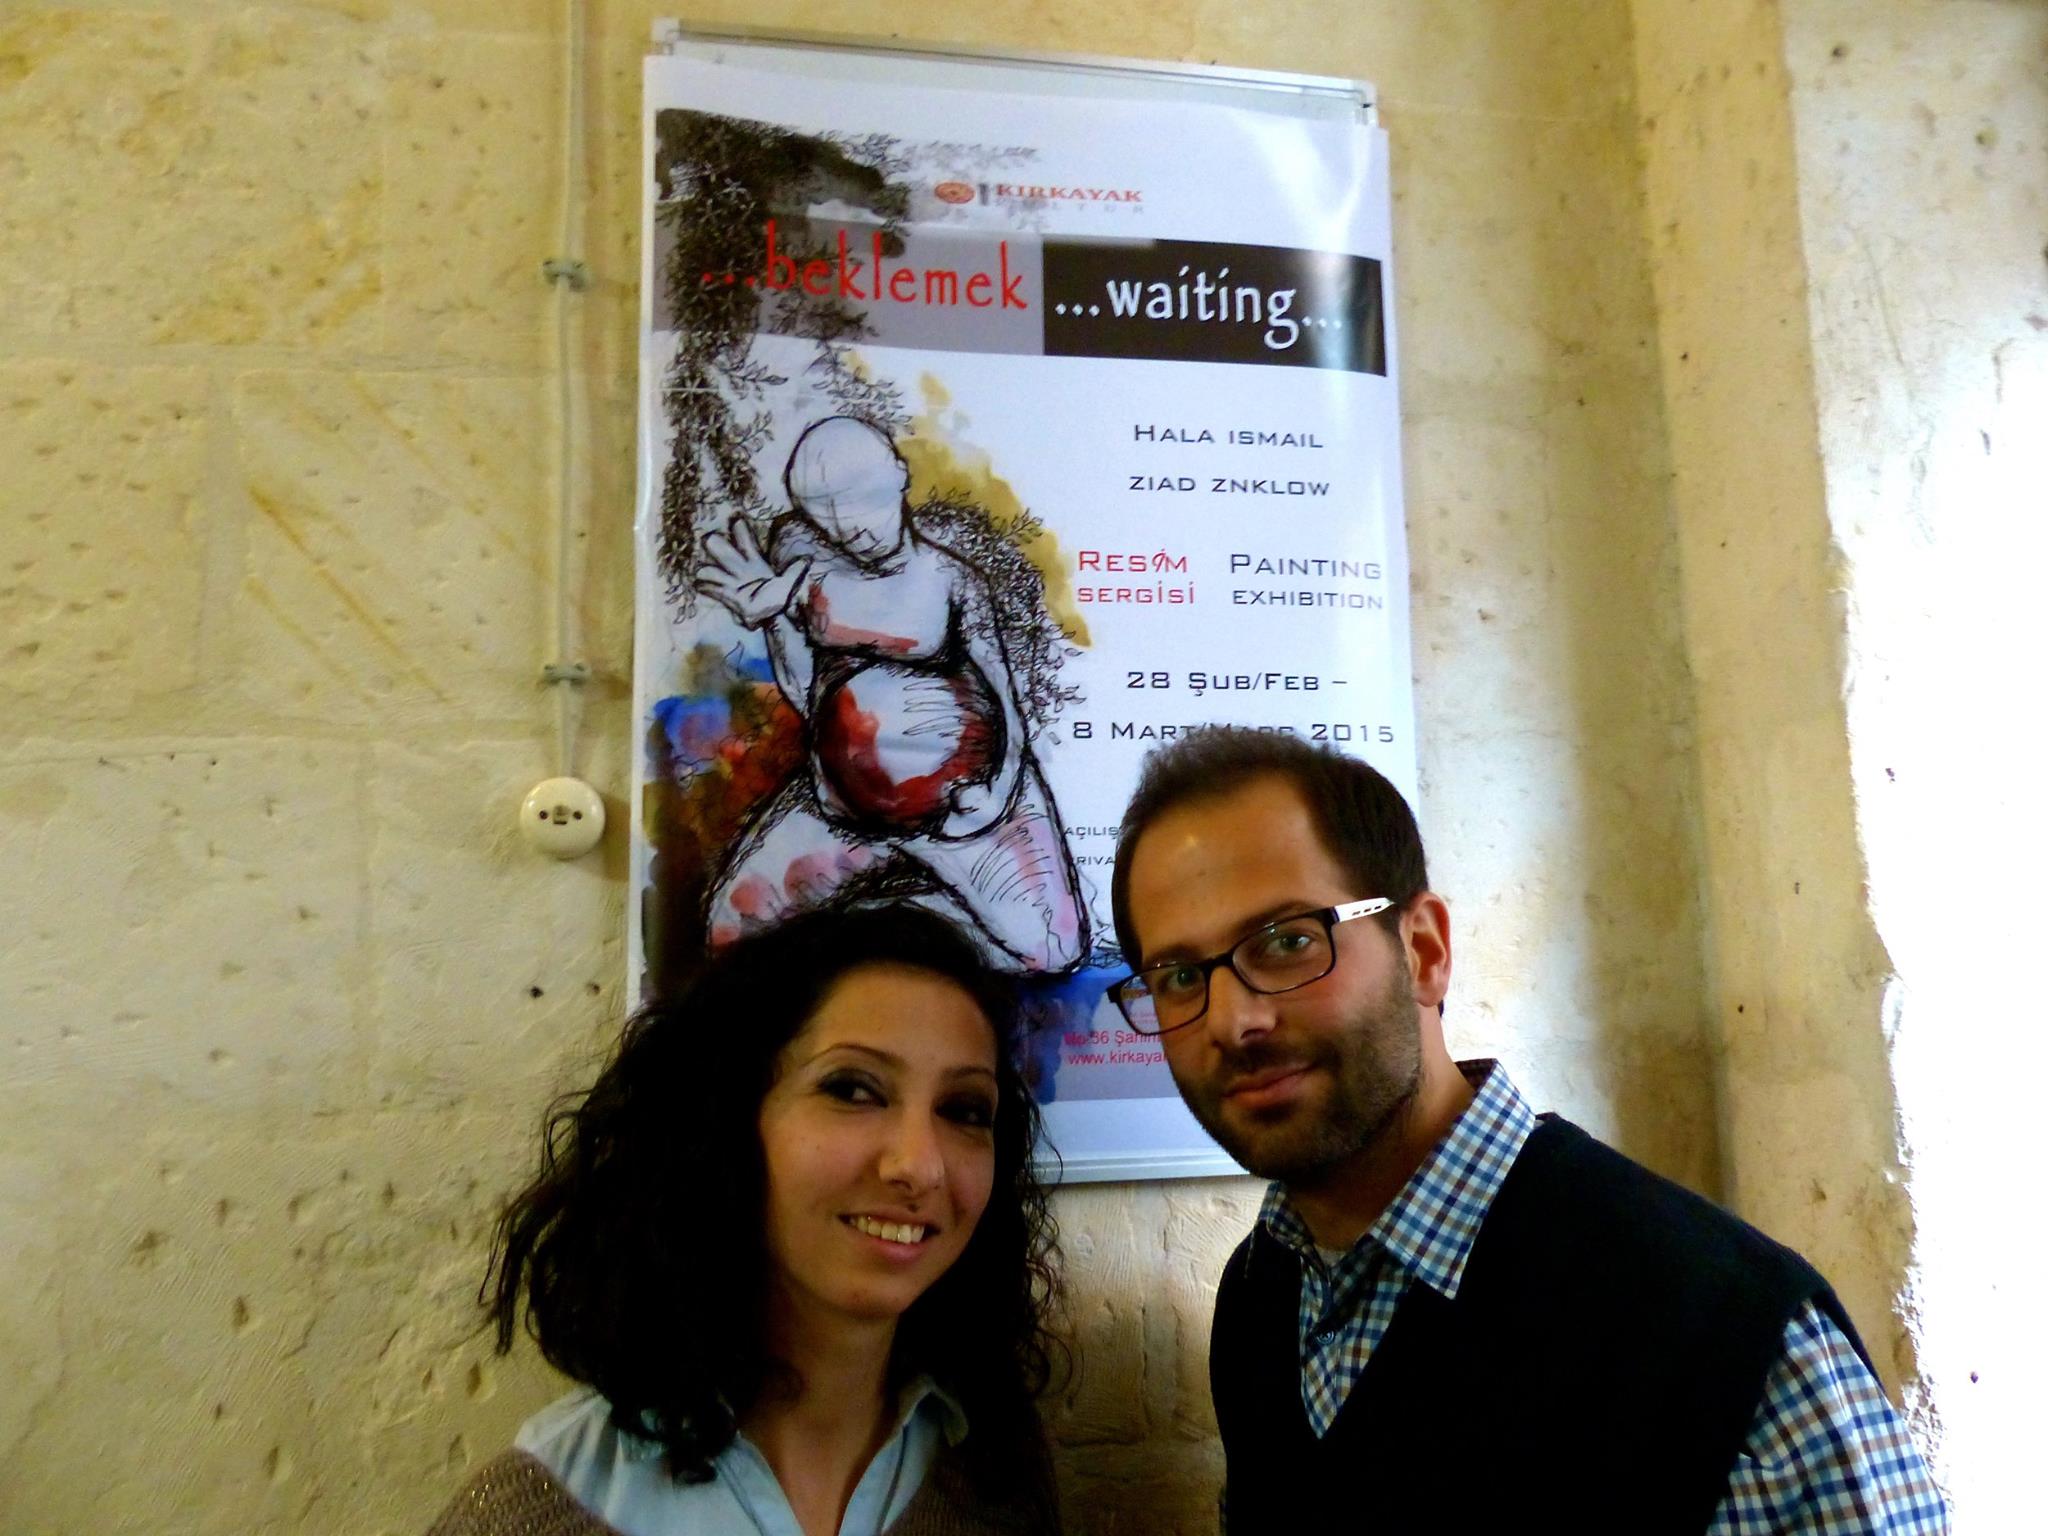 Hala and Ziad, two Syrian refugee artists who benefitted from their residency at Kırkayak. They stand in front of a poster for their 2015 exhibition, "Beklemek / Waiting". 